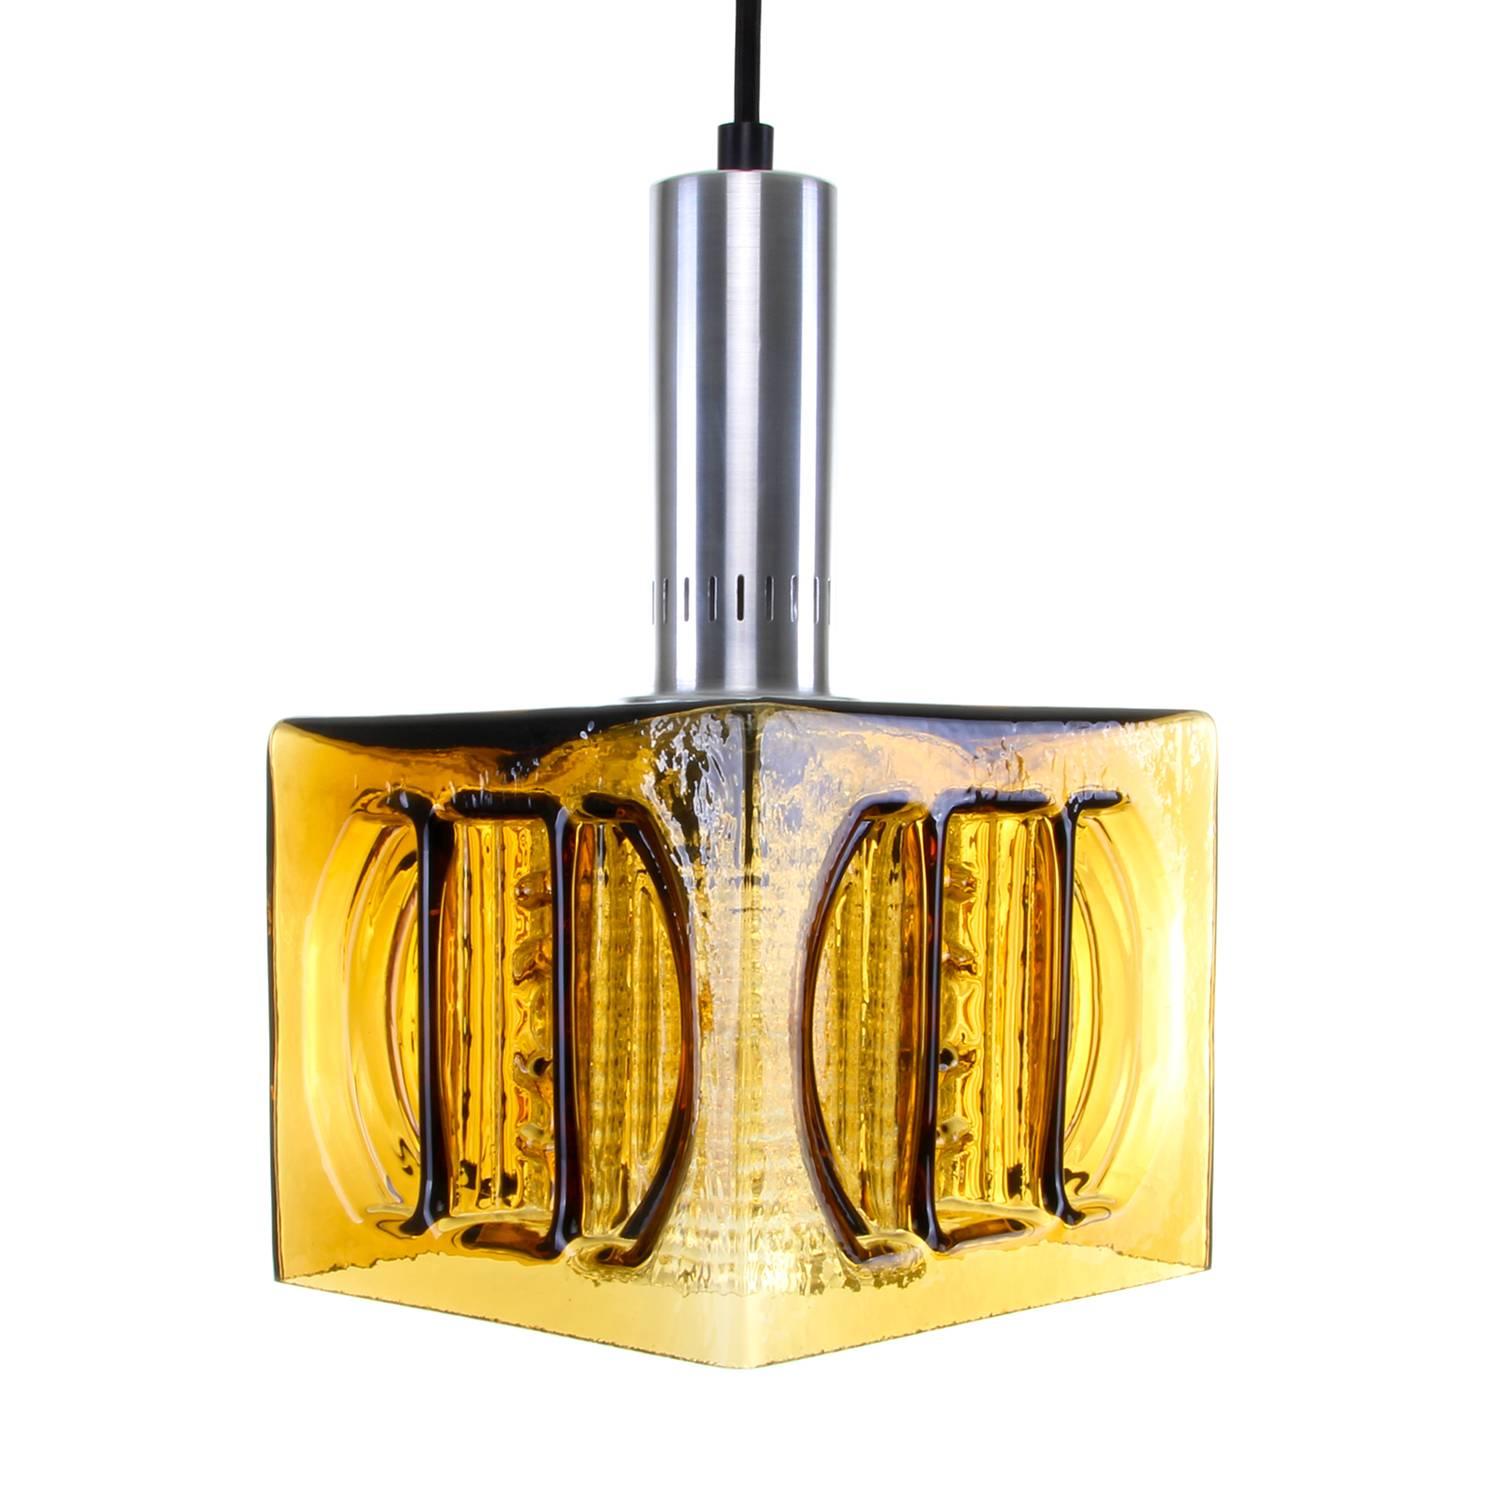 Mid-Century Modern Square Amber Pendant Light, 1970s, Vintage Double Crystal Glass Ceiling Lamp For Sale